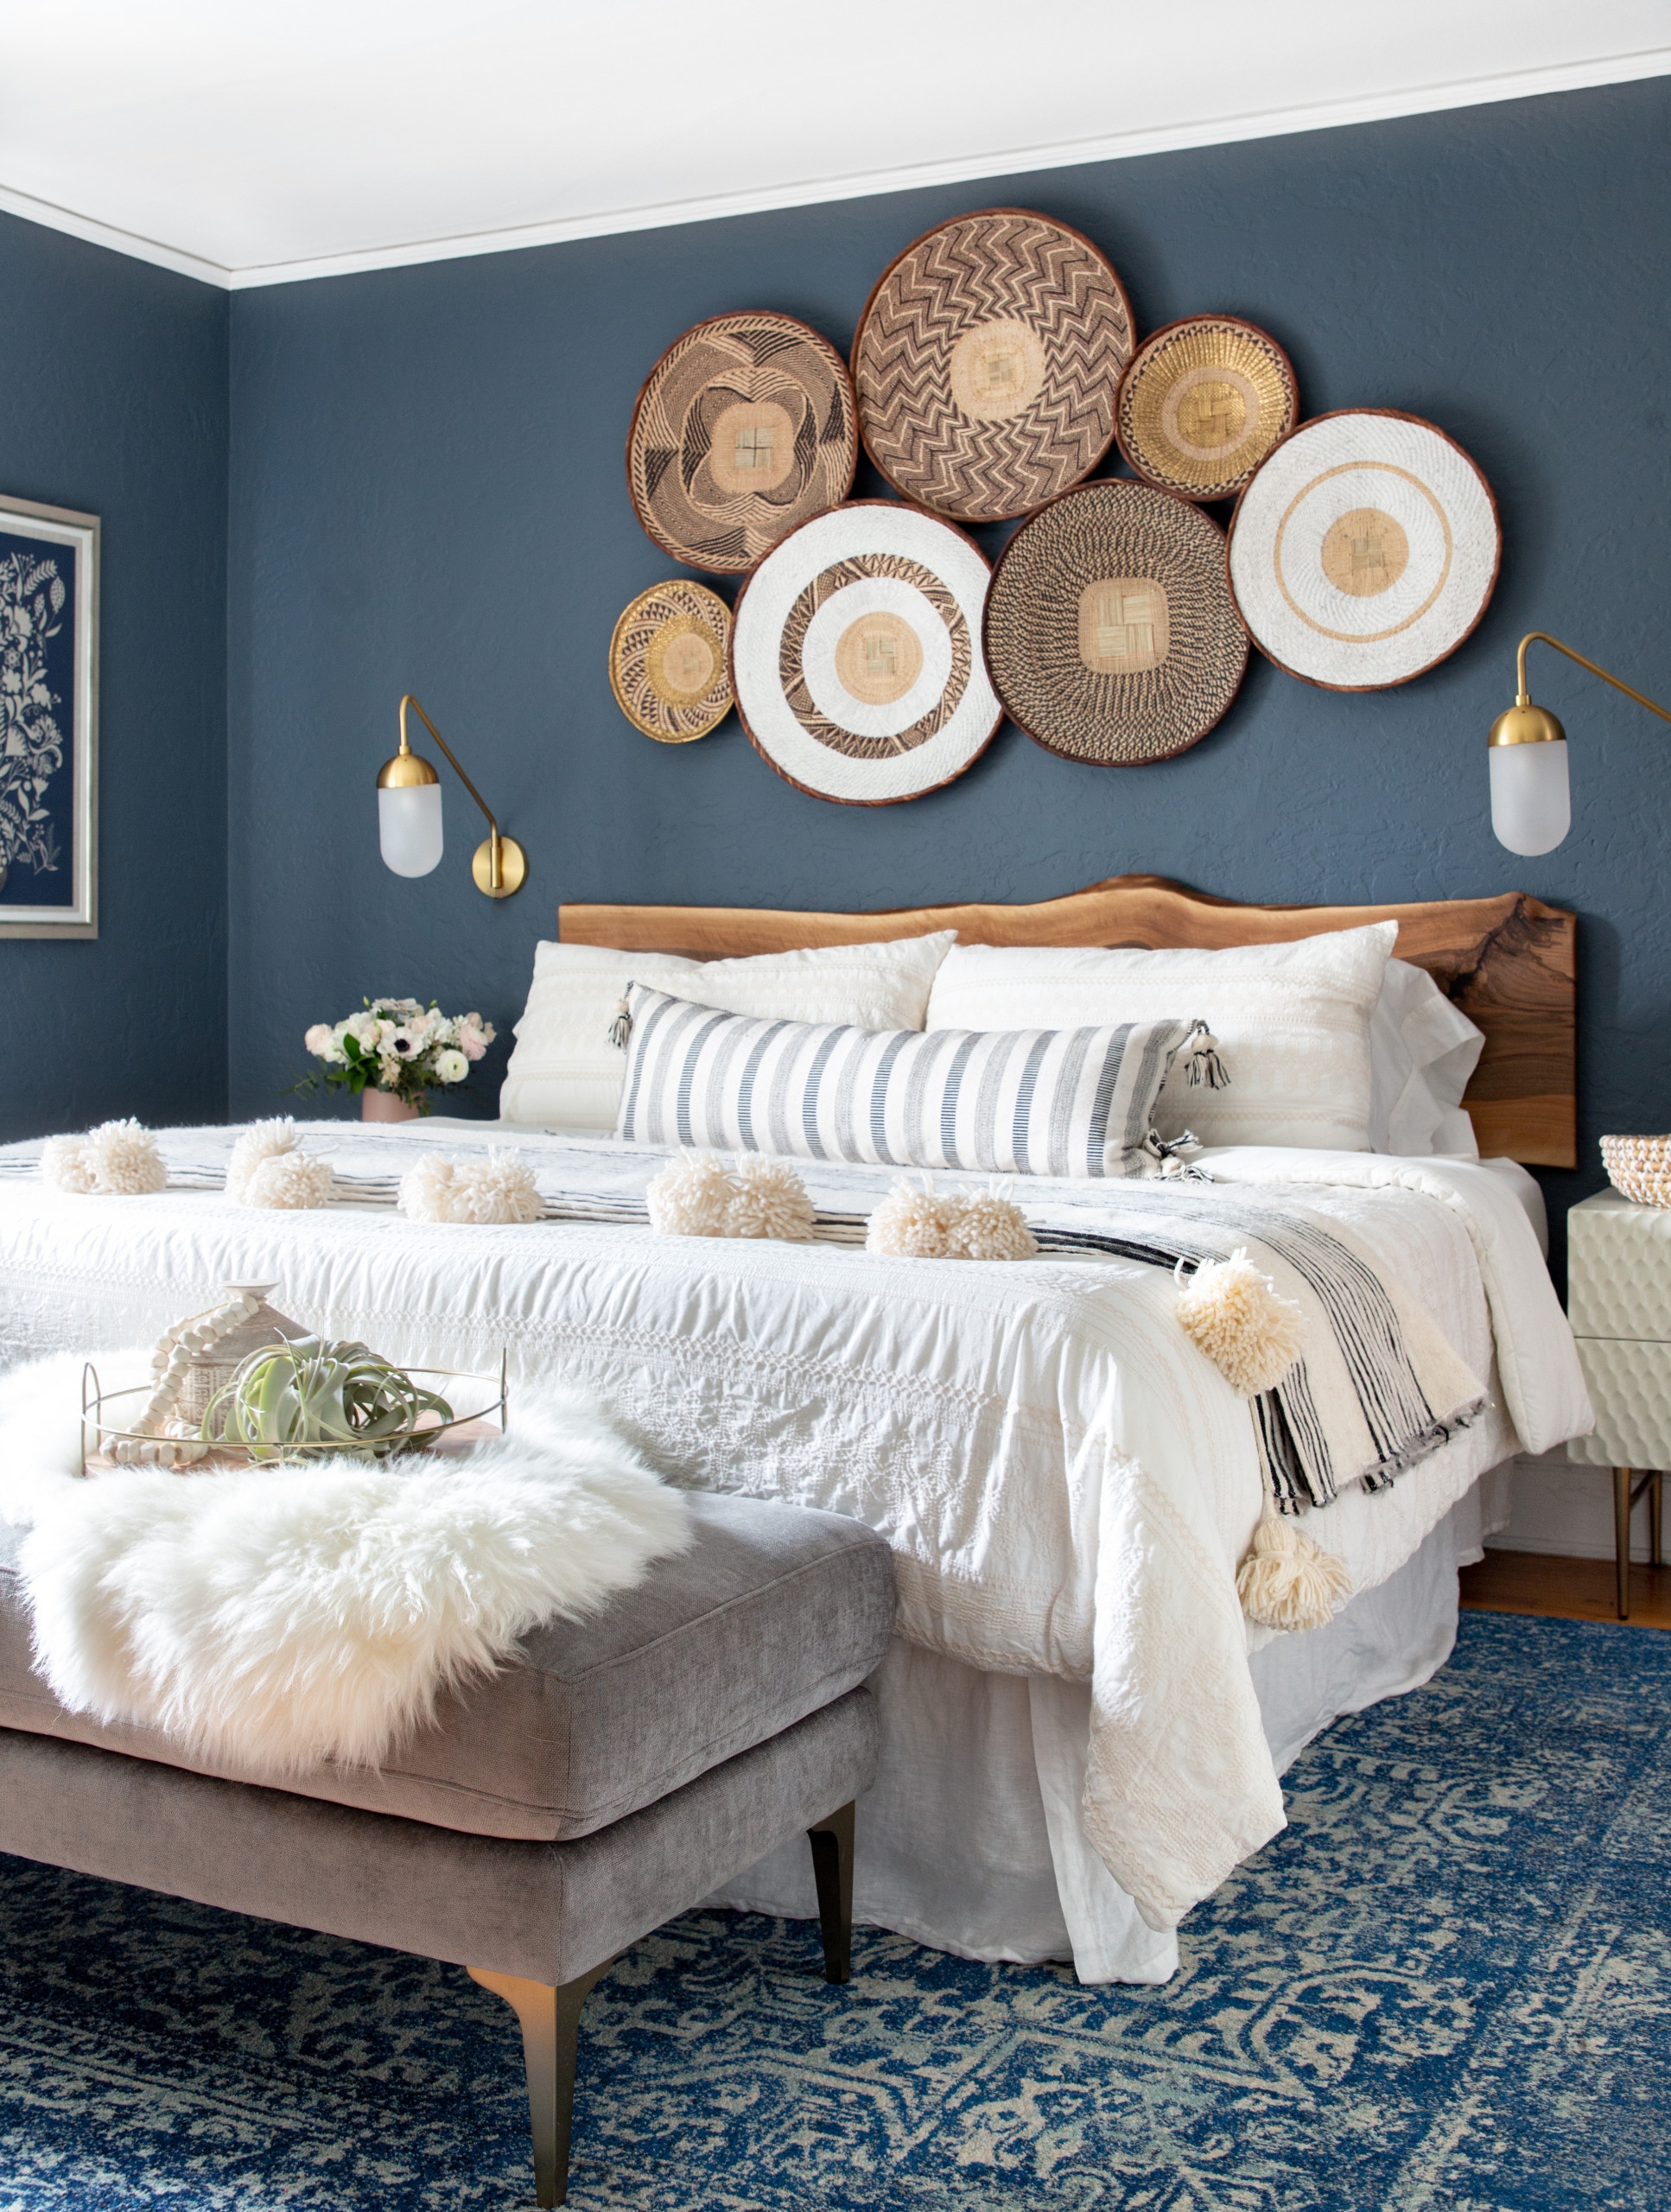 30 Boho Bedroom Ideas For A Colorful, Carefree Space - Foter